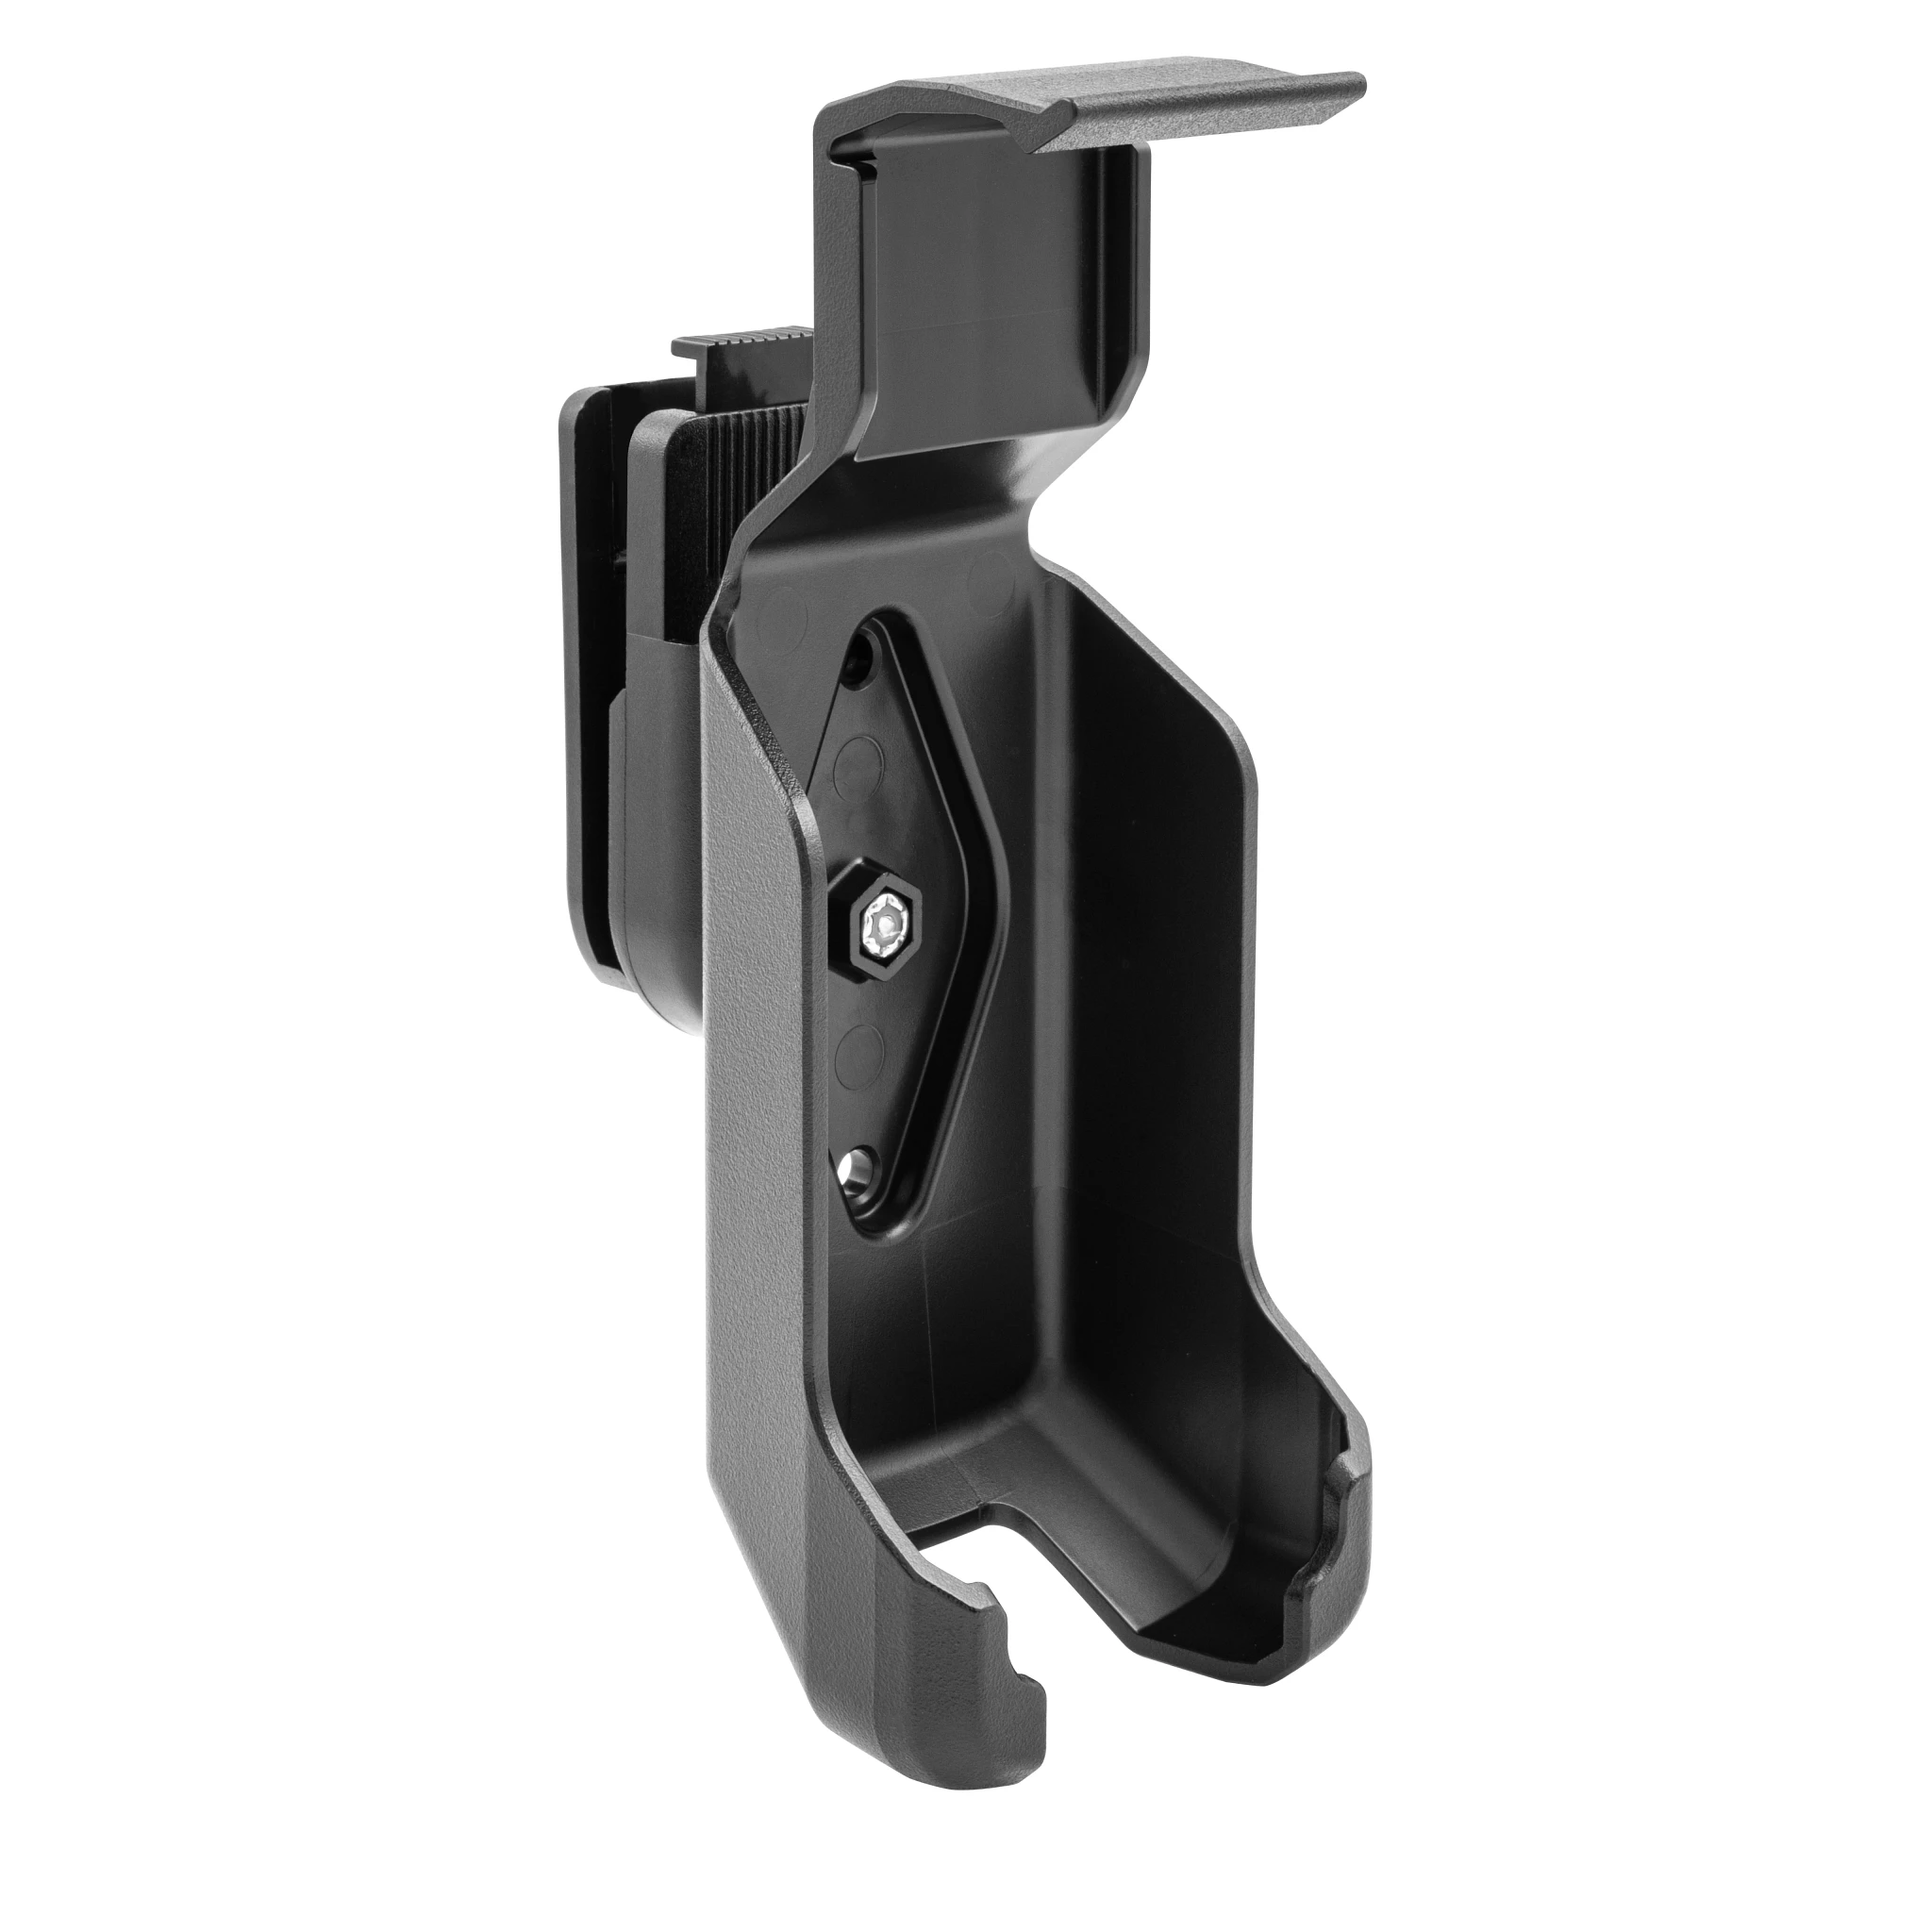 Advanced GPS Navigation Wireless Remote Cradle shown from a three-quarter front view with the clip component attached